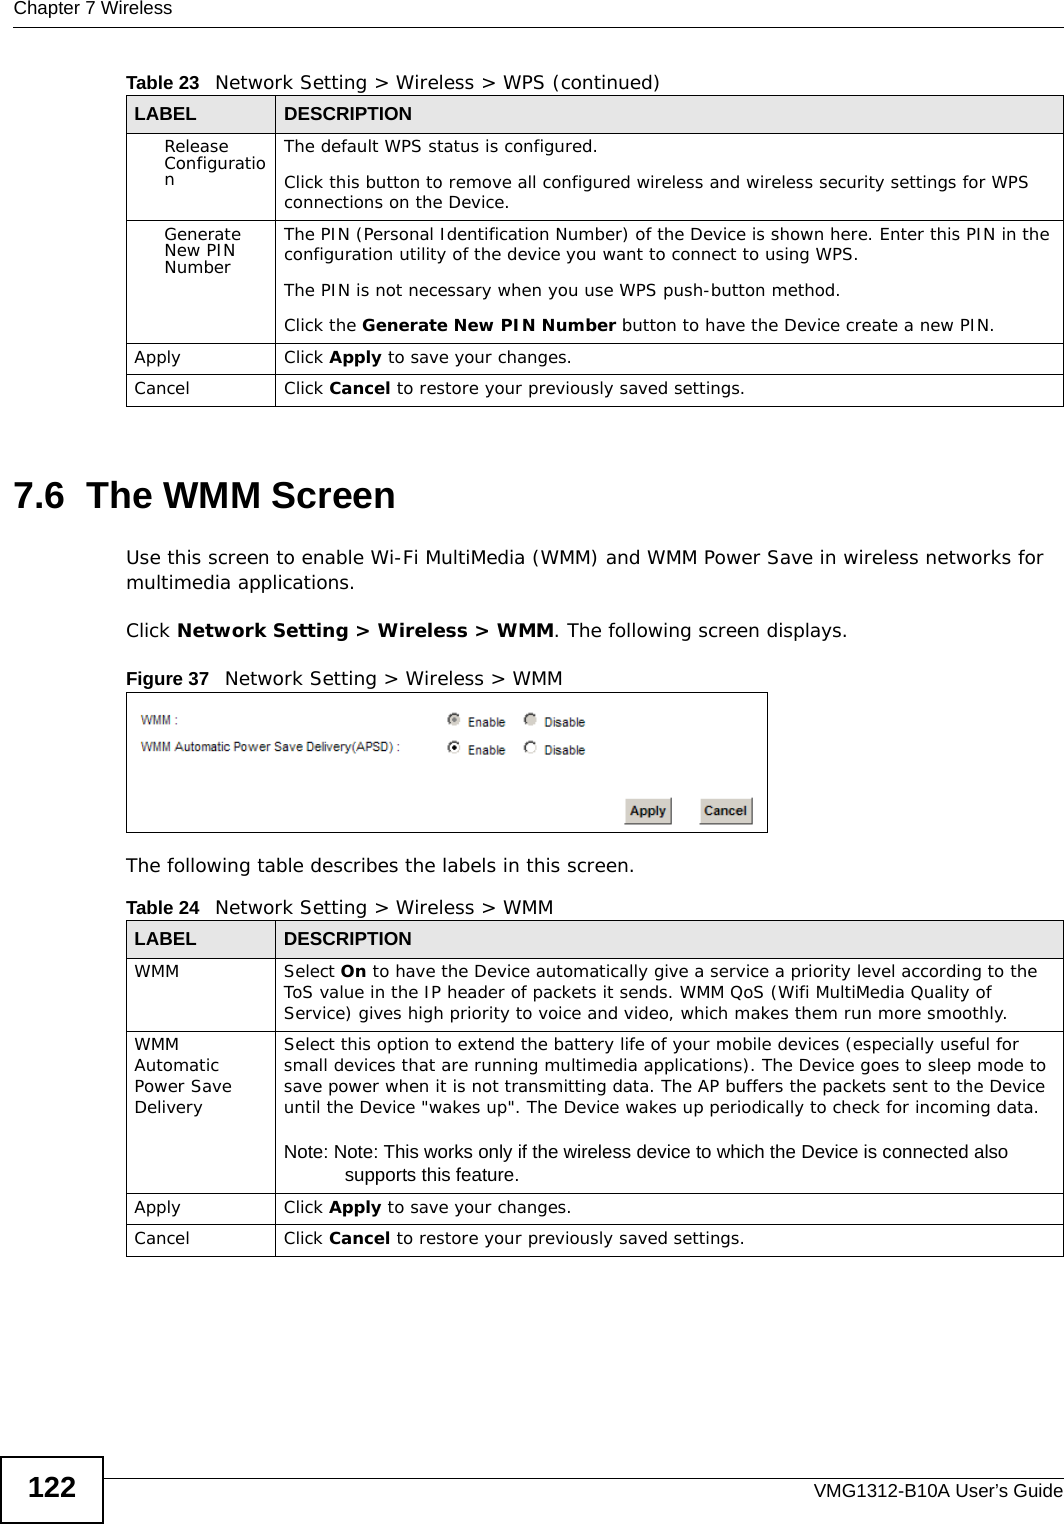 Chapter 7 WirelessVMG1312-B10A User’s Guide1227.6  The WMM ScreenUse this screen to enable Wi-Fi MultiMedia (WMM) and WMM Power Save in wireless networks for multimedia applications.Click Network Setting &gt; Wireless &gt; WMM. The following screen displays.Figure 37   Network Setting &gt; Wireless &gt; WMMThe following table describes the labels in this screen.Release ConfigurationThe default WPS status is configured.Click this button to remove all configured wireless and wireless security settings for WPS connections on the Device.Generate New PIN NumberThe PIN (Personal Identification Number) of the Device is shown here. Enter this PIN in the configuration utility of the device you want to connect to using WPS.The PIN is not necessary when you use WPS push-button method.Click the Generate New PIN Number button to have the Device create a new PIN. Apply Click Apply to save your changes.Cancel Click Cancel to restore your previously saved settings.Table 23   Network Setting &gt; Wireless &gt; WPS (continued)LABEL DESCRIPTIONTable 24   Network Setting &gt; Wireless &gt; WMMLABEL DESCRIPTIONWMM Select On to have the Device automatically give a service a priority level according to the ToS value in the IP header of packets it sends. WMM QoS (Wifi MultiMedia Quality of Service) gives high priority to voice and video, which makes them run more smoothly.WMM Automatic Power Save DeliverySelect this option to extend the battery life of your mobile devices (especially useful for small devices that are running multimedia applications). The Device goes to sleep mode to save power when it is not transmitting data. The AP buffers the packets sent to the Device until the Device &quot;wakes up&quot;. The Device wakes up periodically to check for incoming data.Note: Note: This works only if the wireless device to which the Device is connected also supports this feature.Apply Click Apply to save your changes.Cancel Click Cancel to restore your previously saved settings.